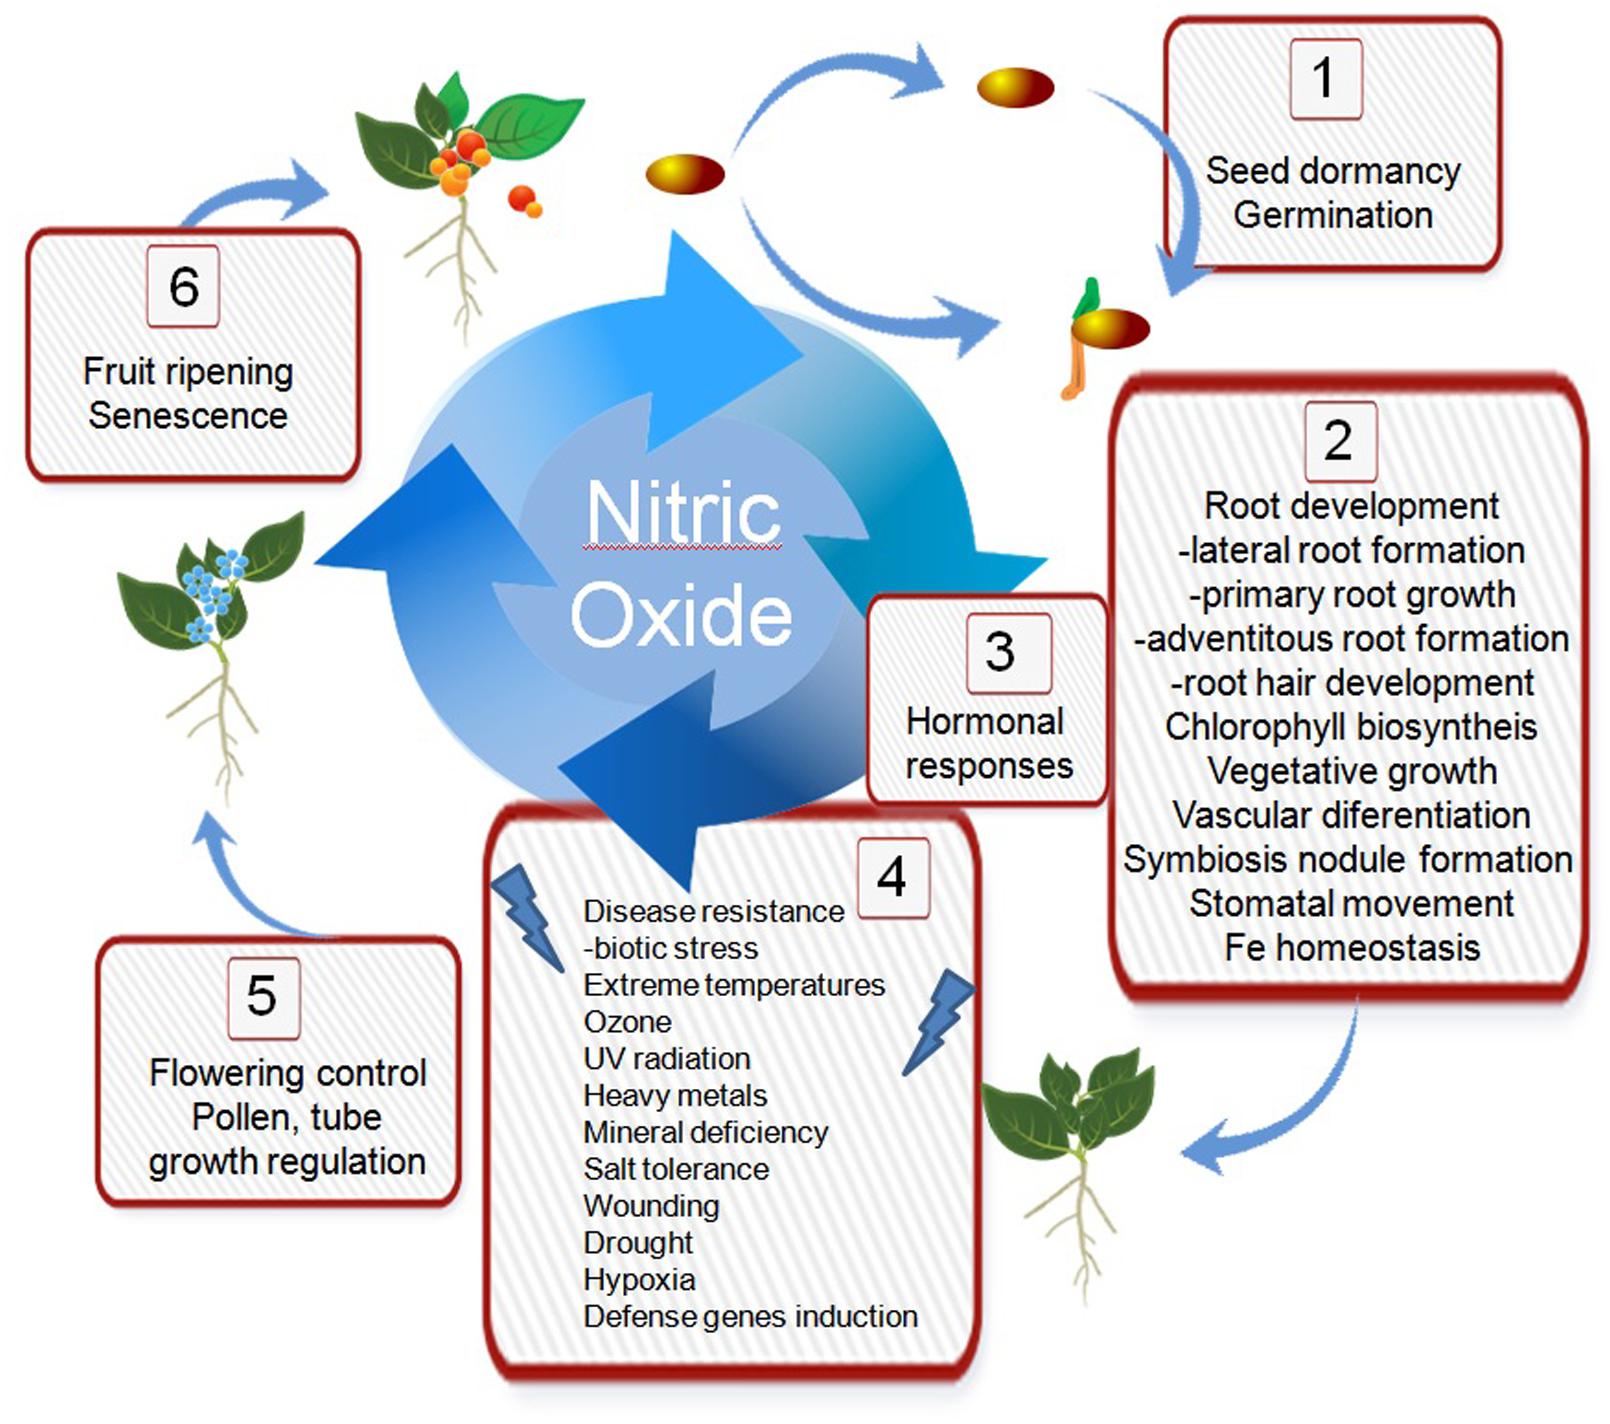 Full article: Signaling through reactive oxygen and nitrogen species is  differentially modulated in sunflower seedling root and cotyledon in  response to various nitric oxide donors and scavengers*